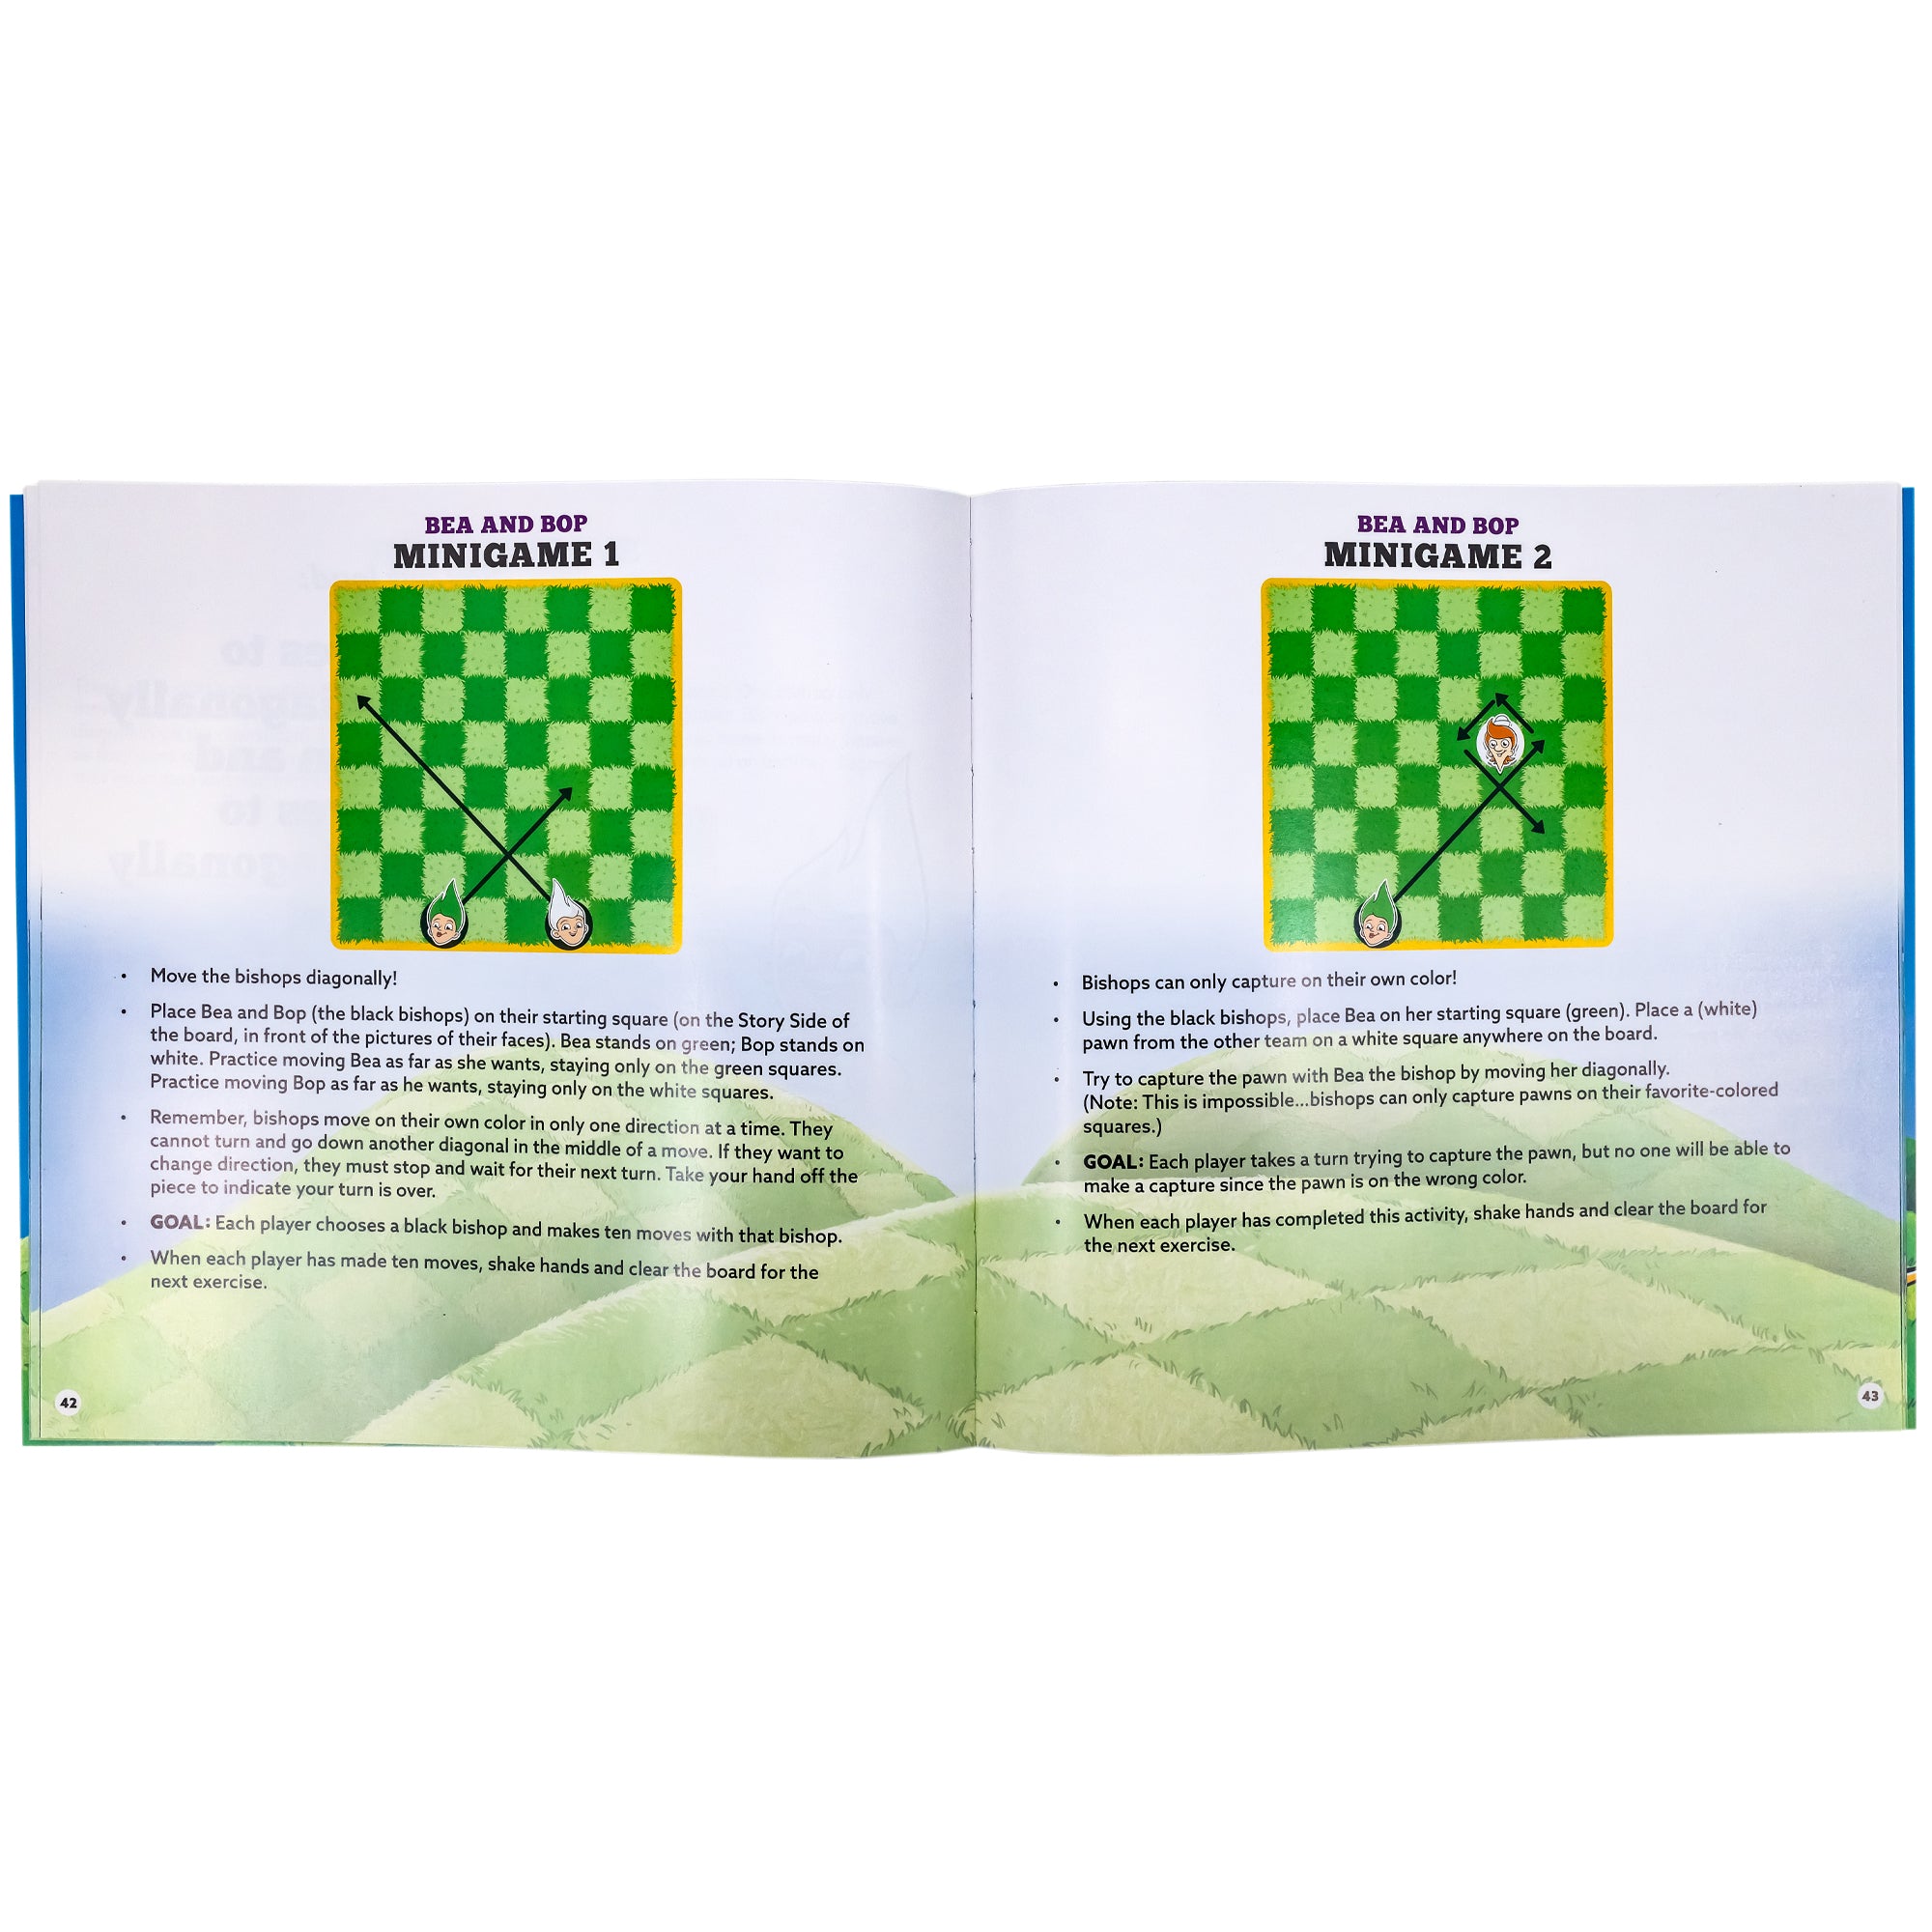 Story Time Chess instruction book open to show 2 mini games. The left page is titled “Bea and Bop, Minigame 1” and the right page is titled “Bea and Bop, Minigame 2.” Under the titles is an illustration of the dark and light checkered game board. There are 2 character images and arrows pointing in the directions they are allowed to move. Under the image is the direction on how to play. The page background is a blue sky with patch work, green, grassy hills.